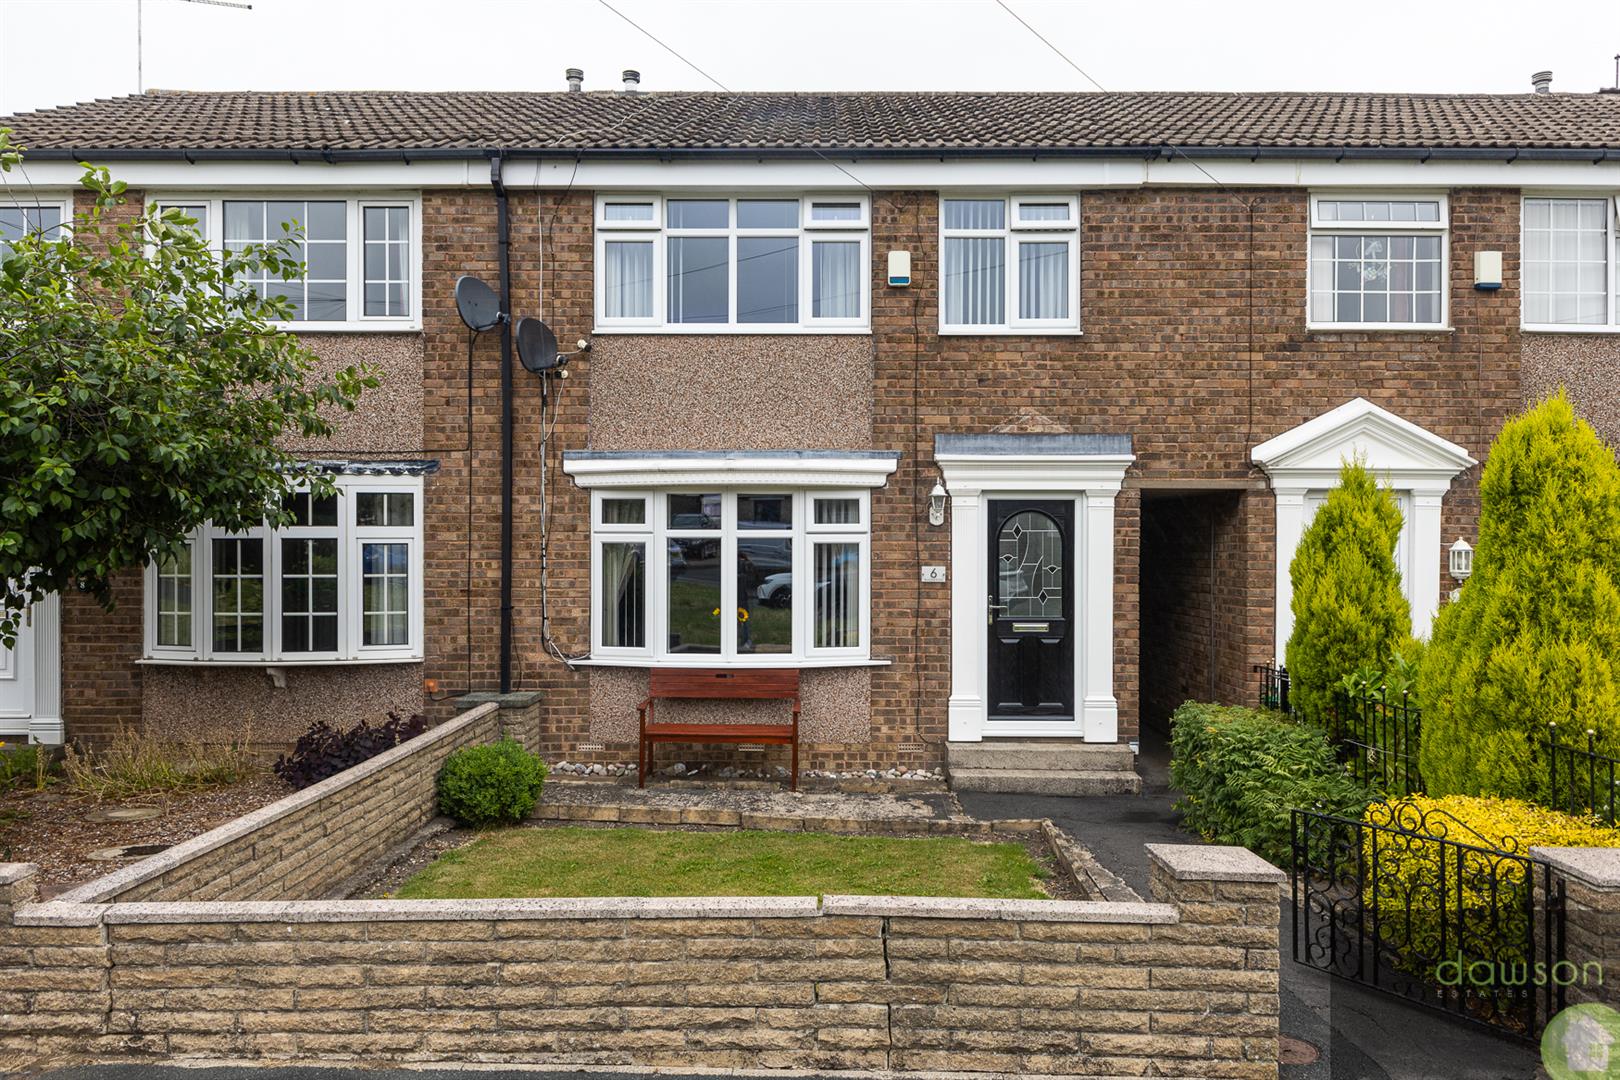 3 bed  for sale in Bowood Road, Elland, HX5 